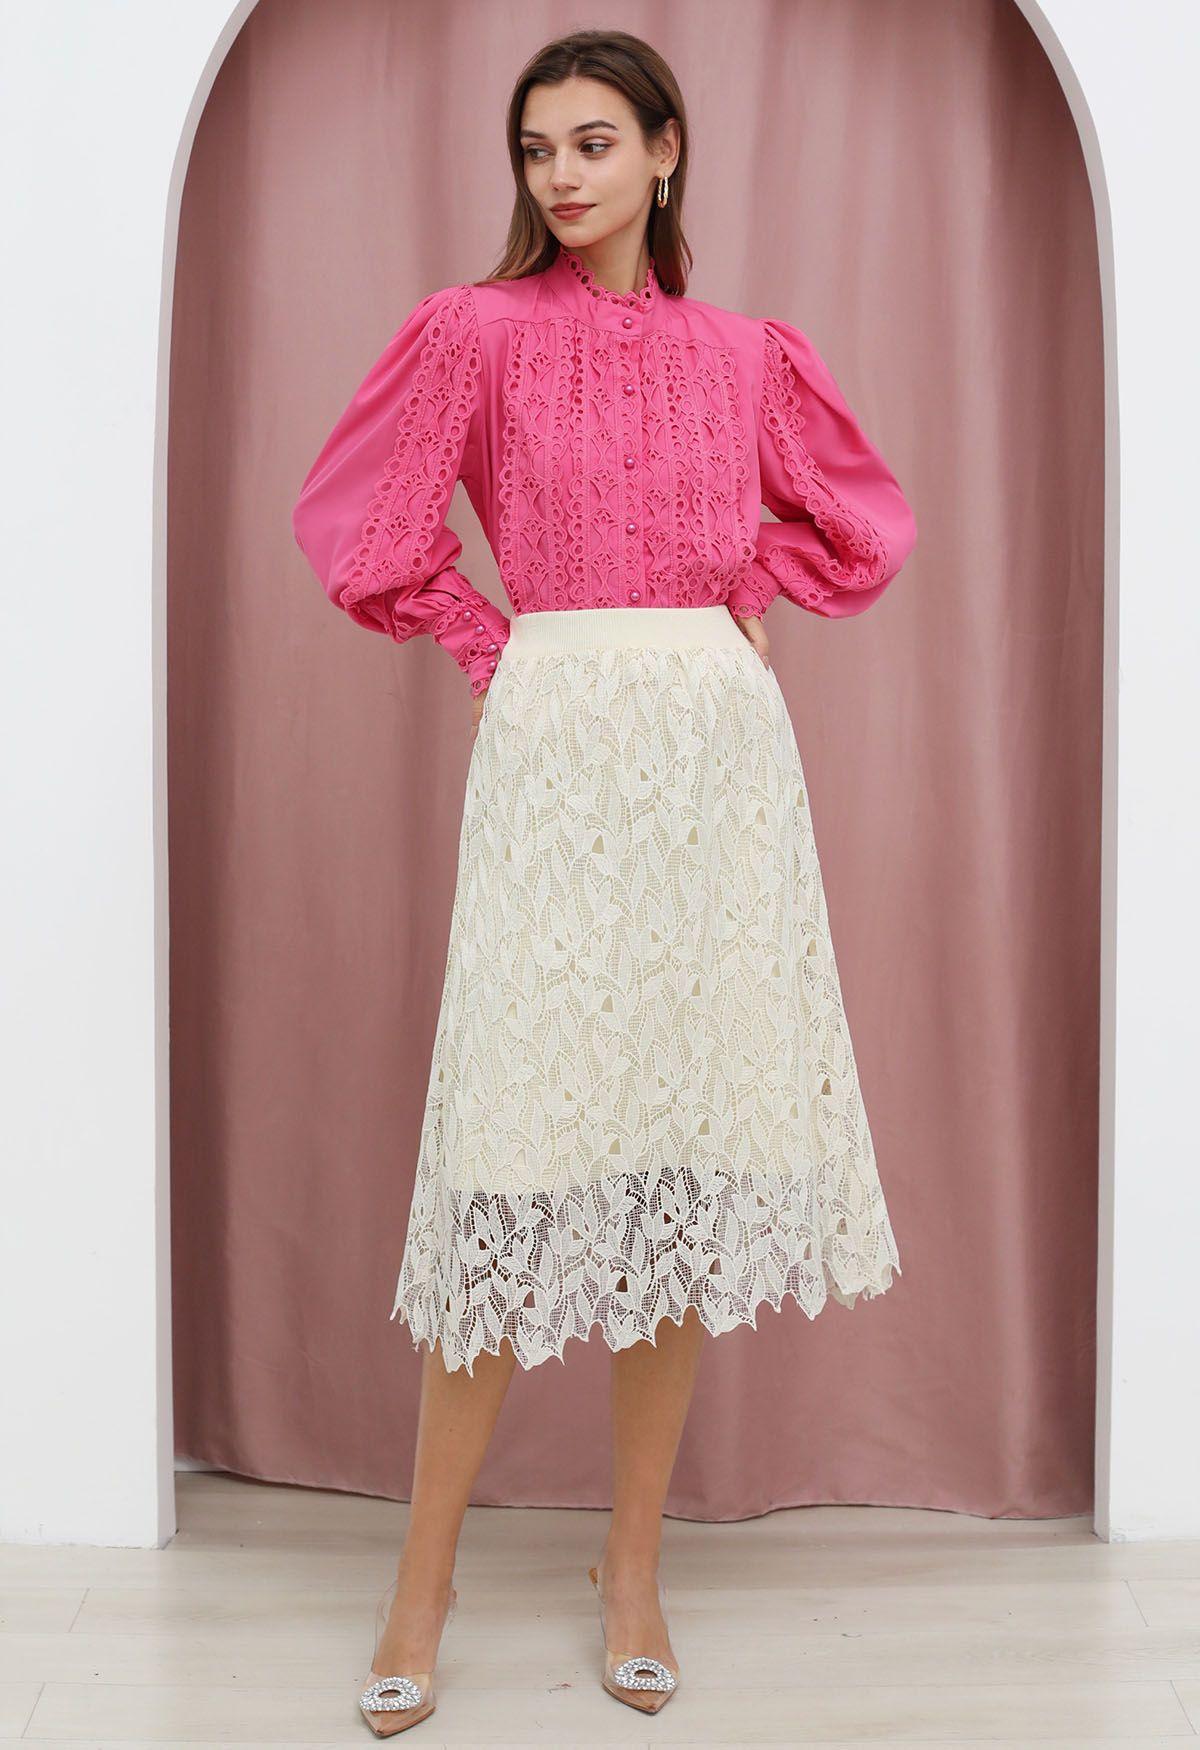 Exquisite Cutwork Bubble Sleeves Button-Up Shirt in Hot Pink